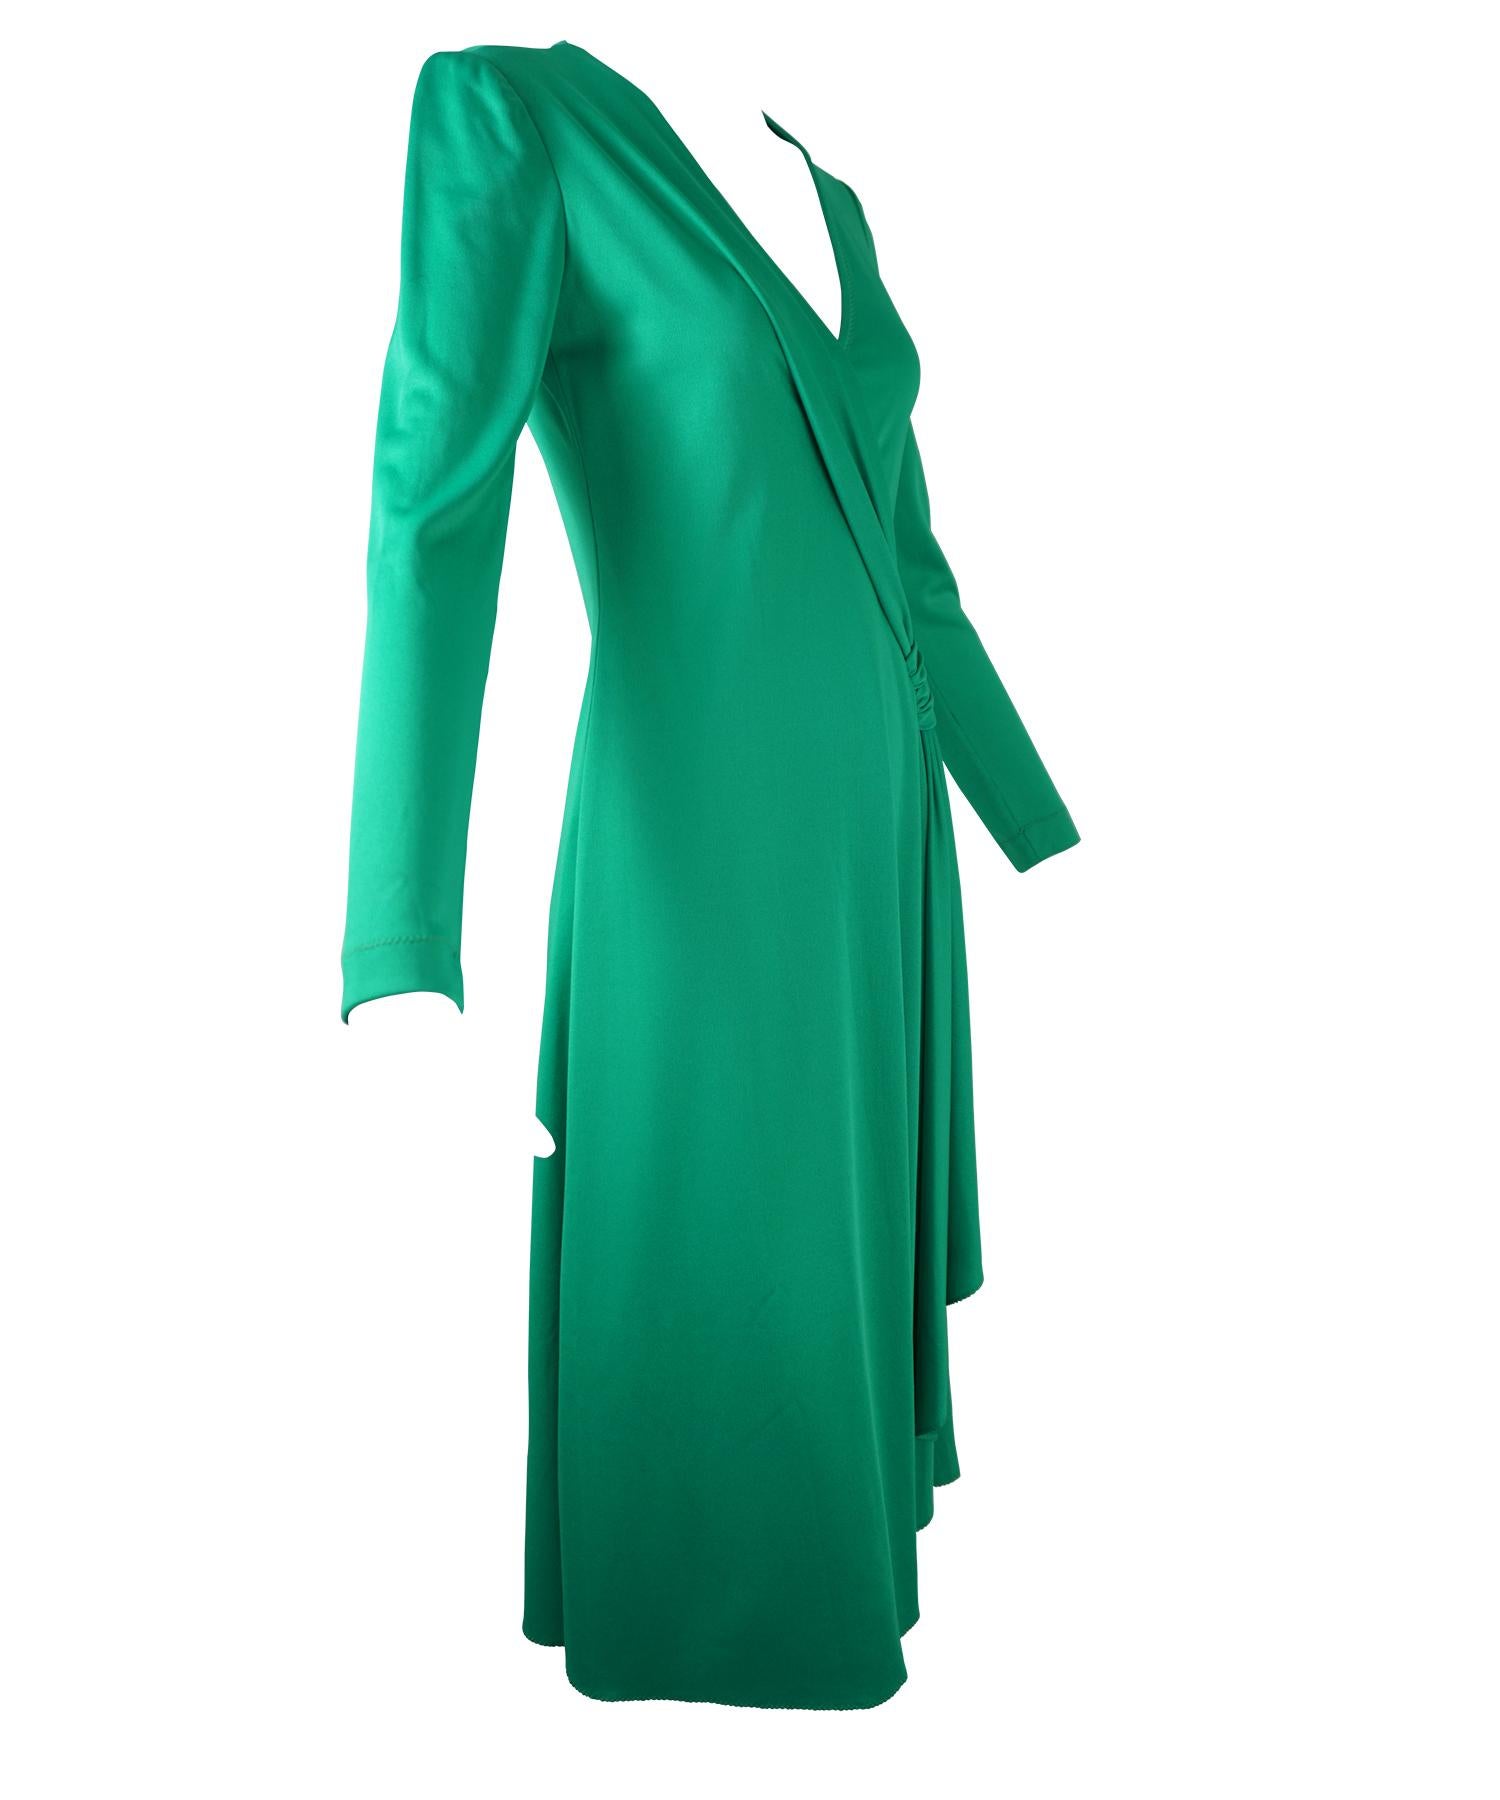 Stephen Burrows bright kelly green rayon matte jersey dress. Vintage 1970's haute disco. Features a deep V neck, ruched gathering sash on left hip above an asymmetrical side opening. Clothing by Stephen Burrows is rare to find on the resale market